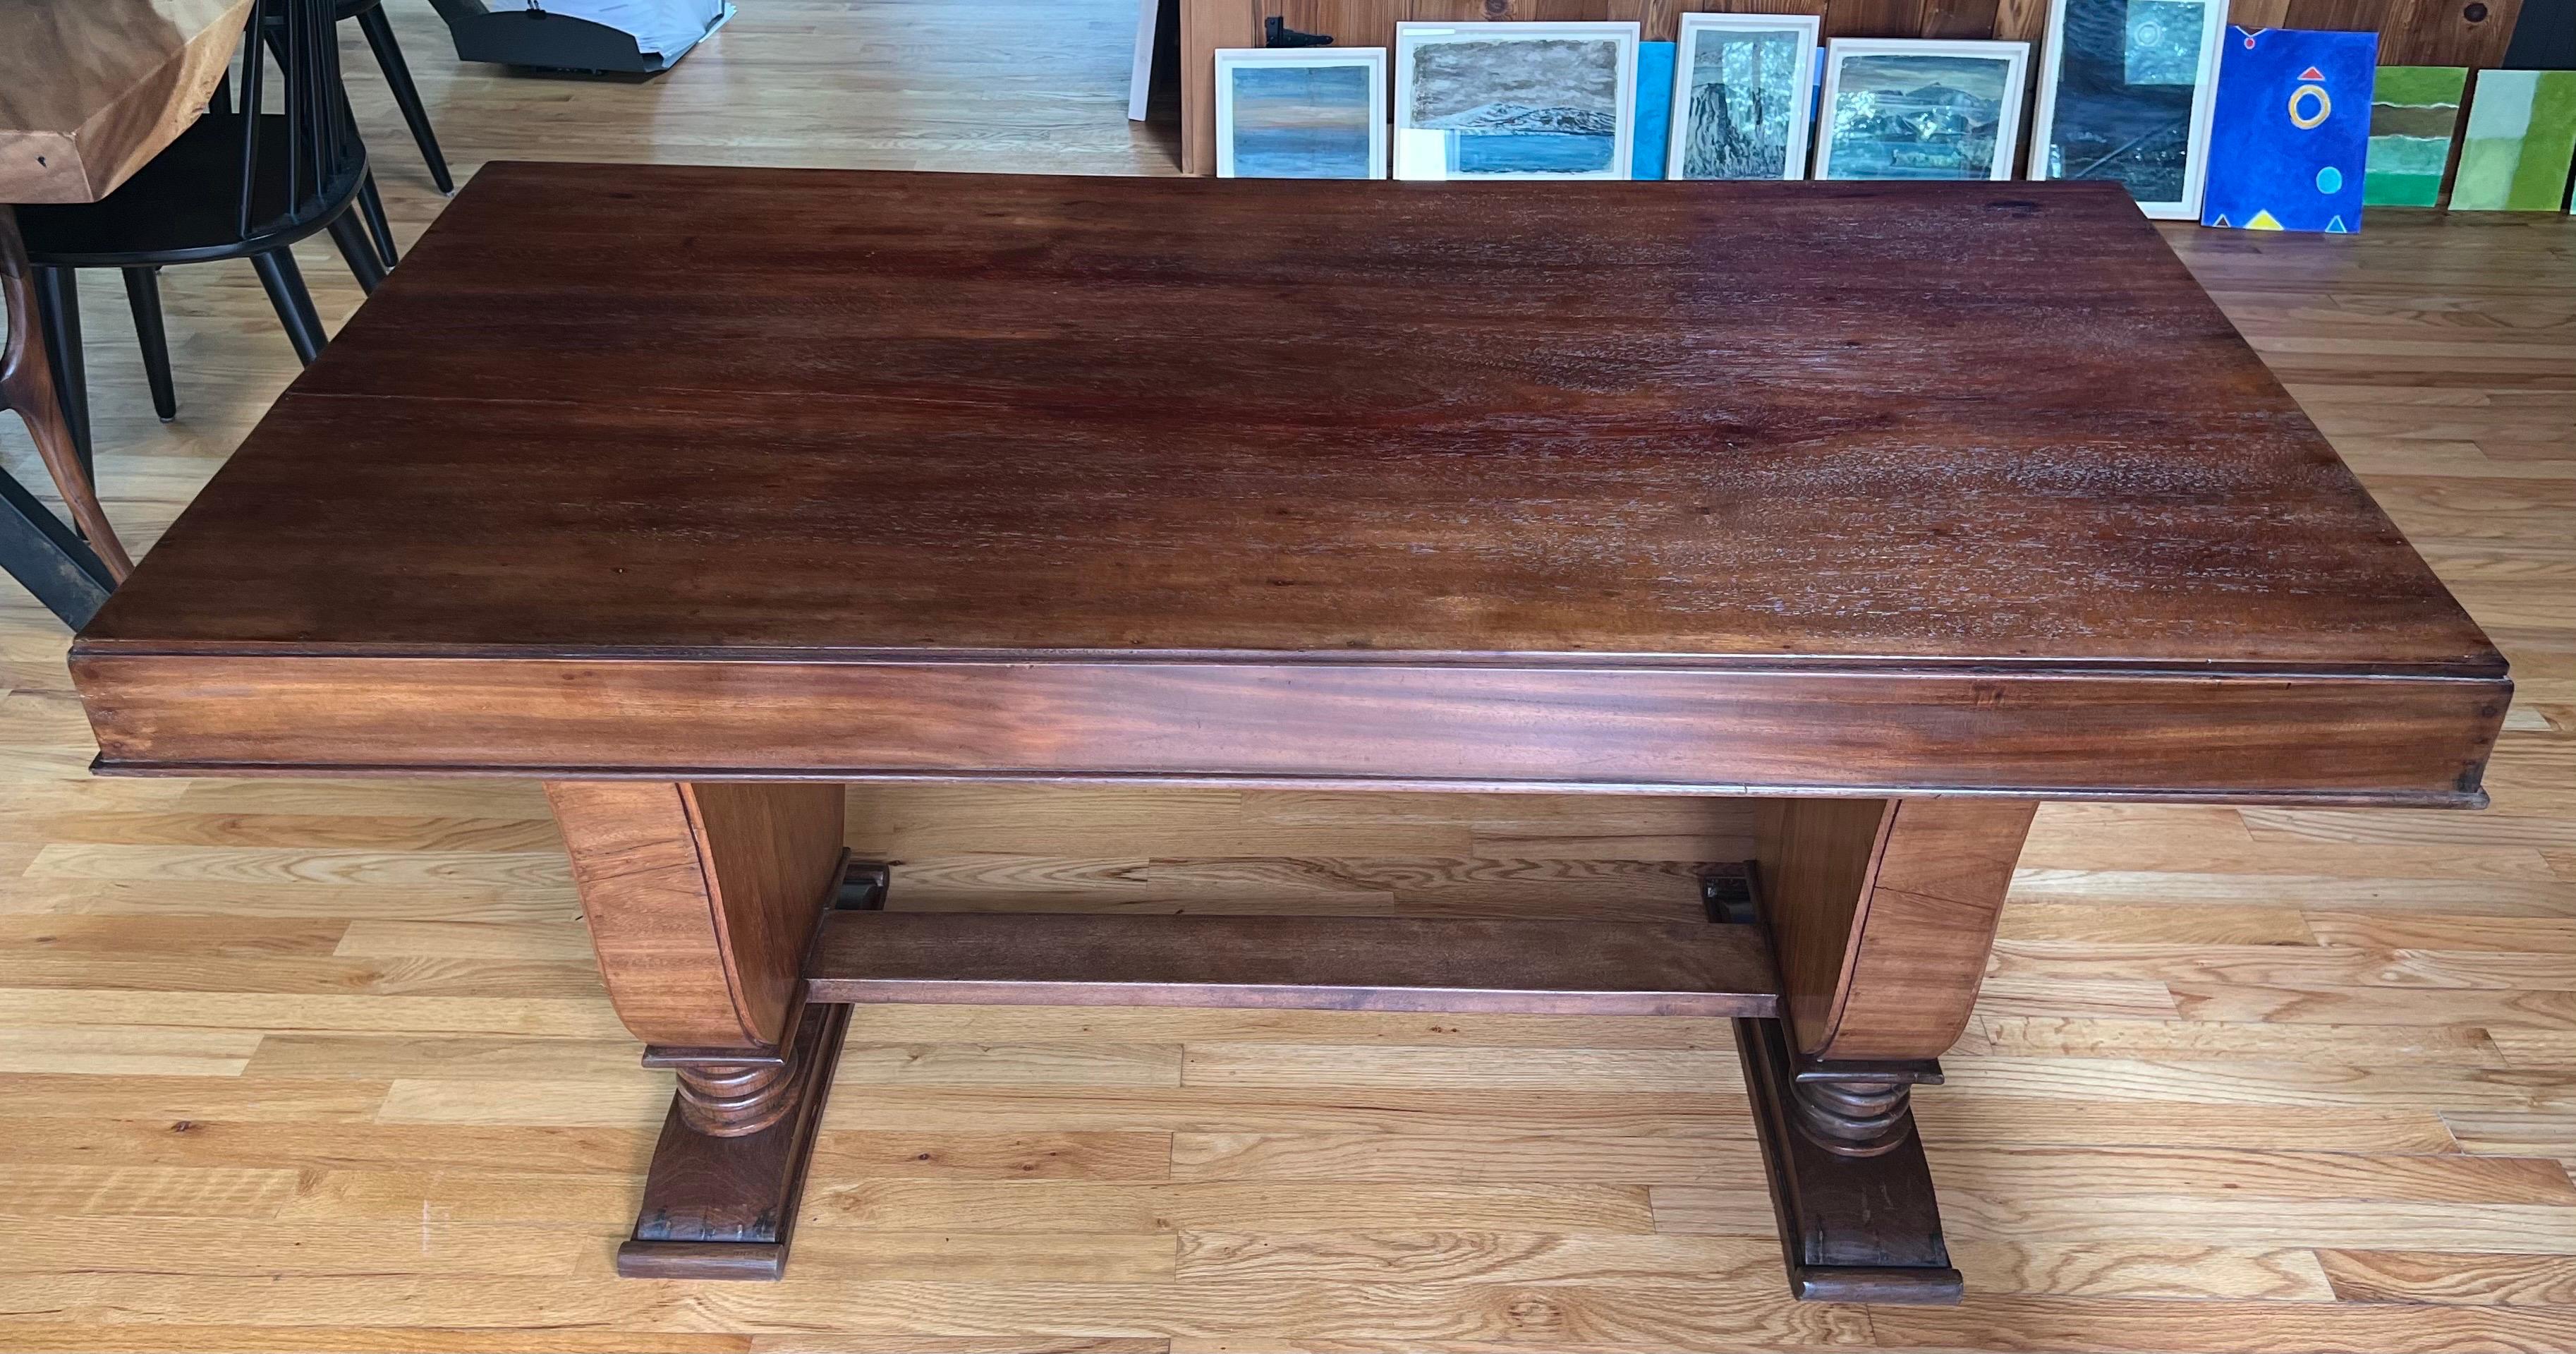 Rare French Art Deco Writing Table / Desk in Teak c. 1925, style of Andre Groult For Sale 2